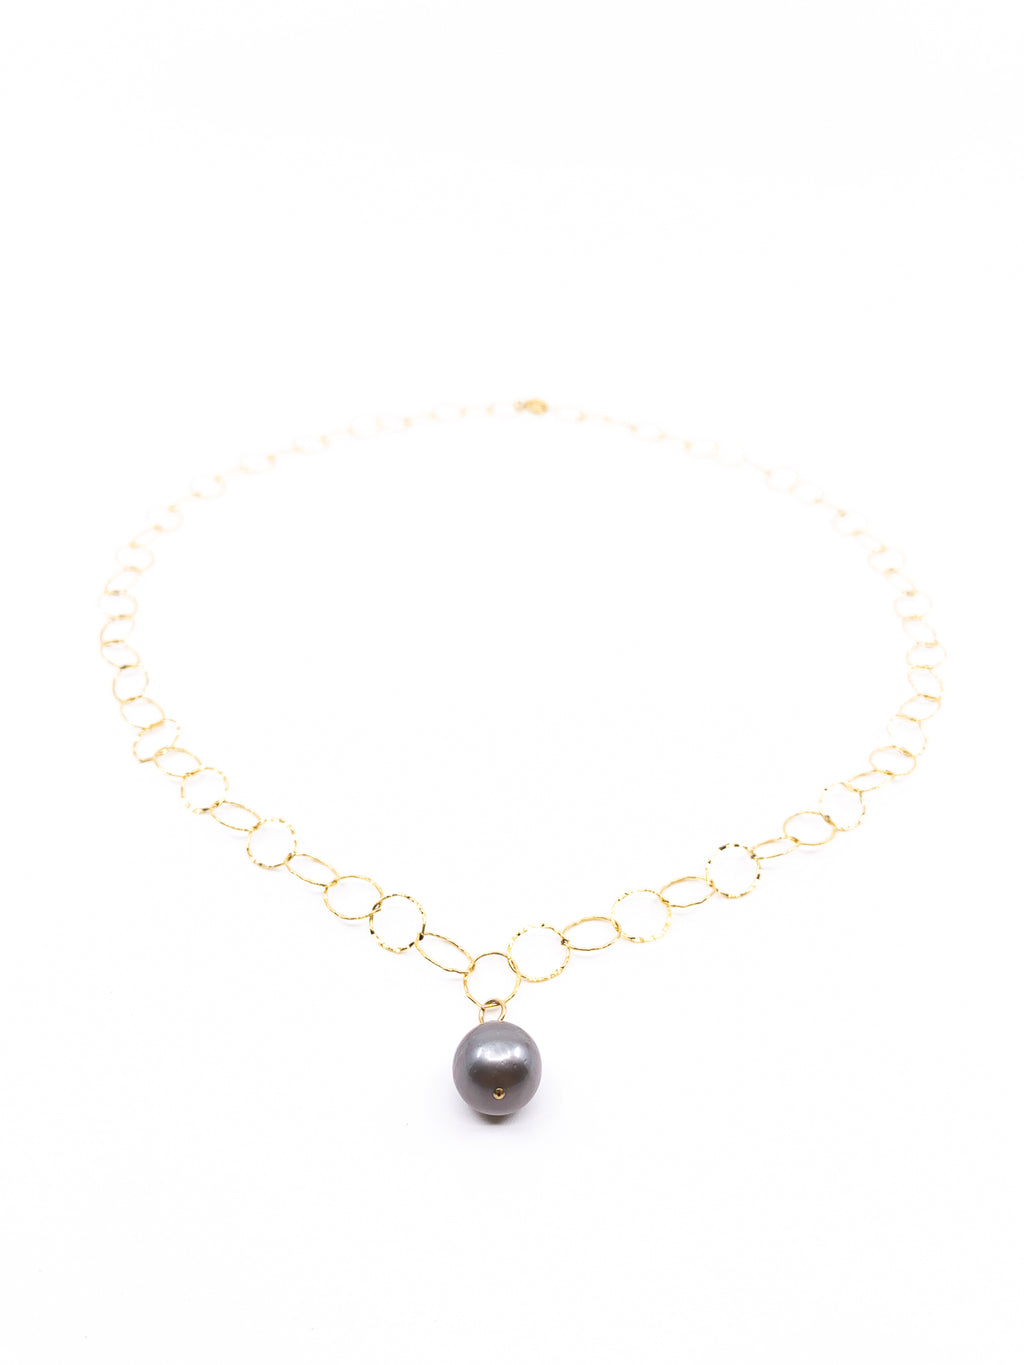 tahitian pearl large gold chain necklace by eve black jewelry made in Hawaii